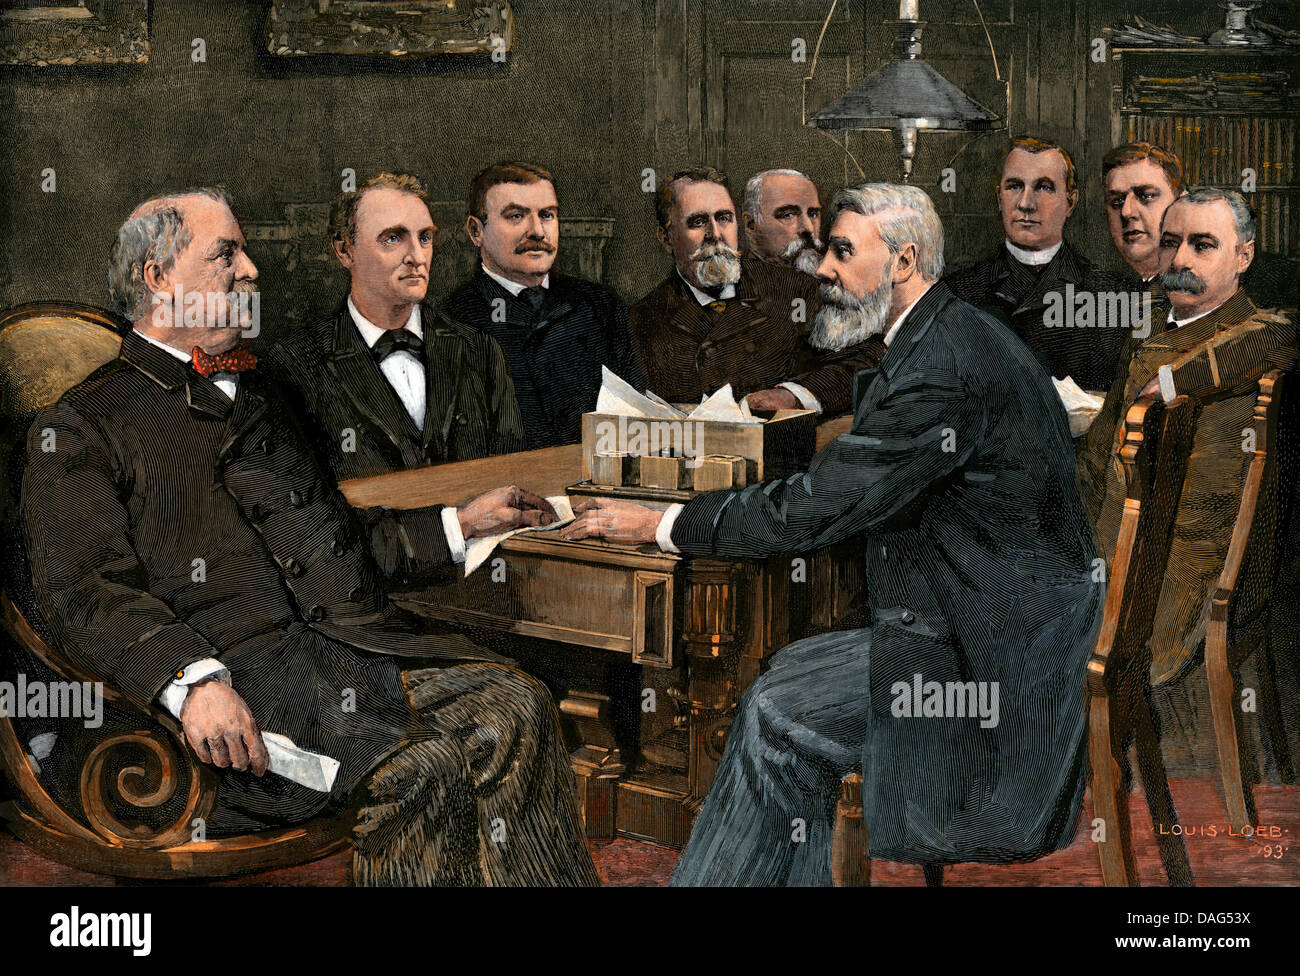 Grover Cleveland and his Cabinet members during his second administration, 1893. Digitally colored woodcut of a Louis Loeb illustration Stock Photo